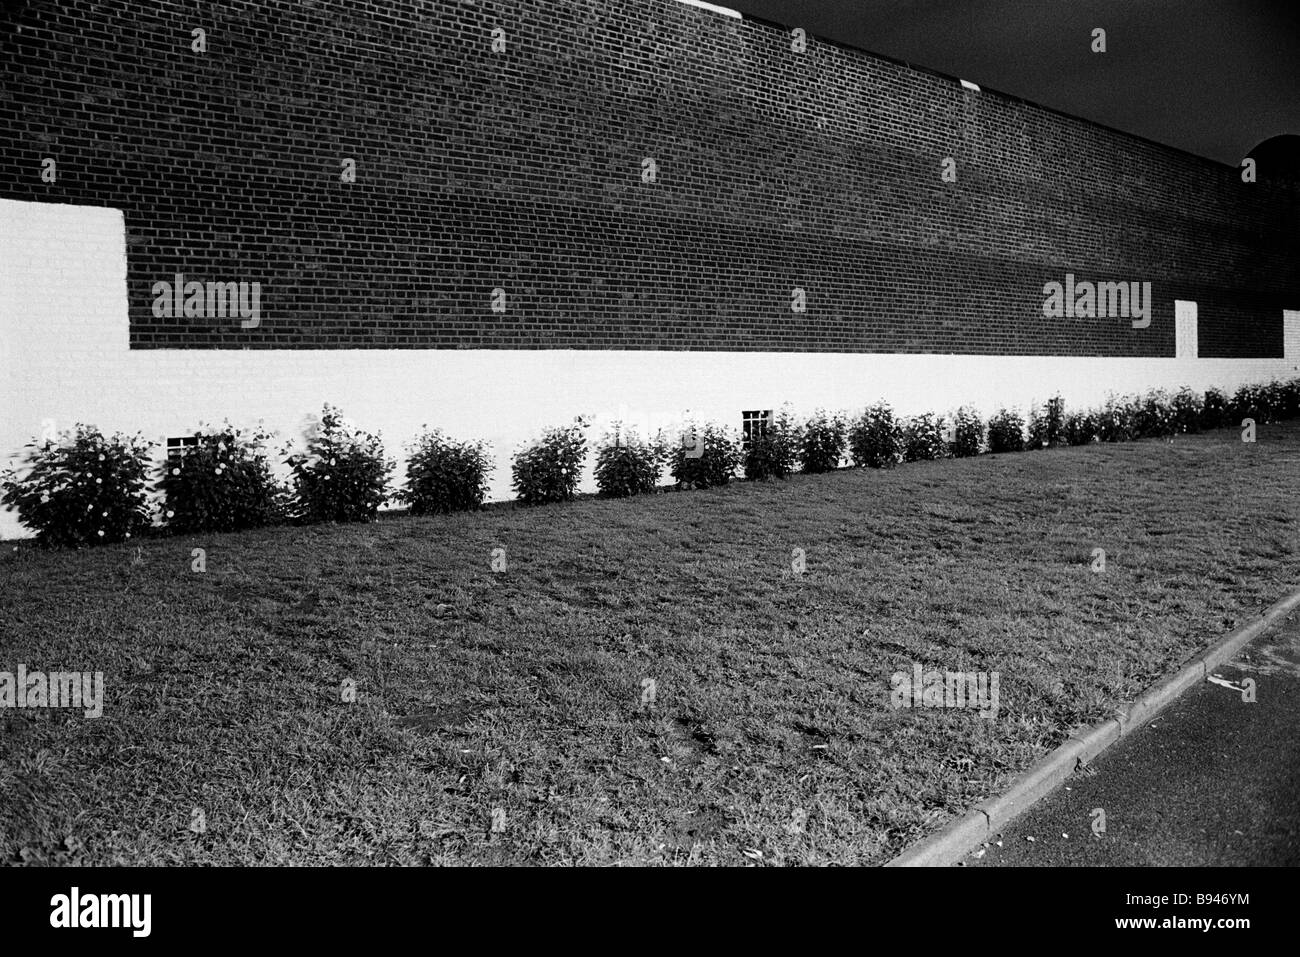 Shrubs planted along the wall where those who were hanged at the prison are buried. Pentonville Prison London England Stock Photo